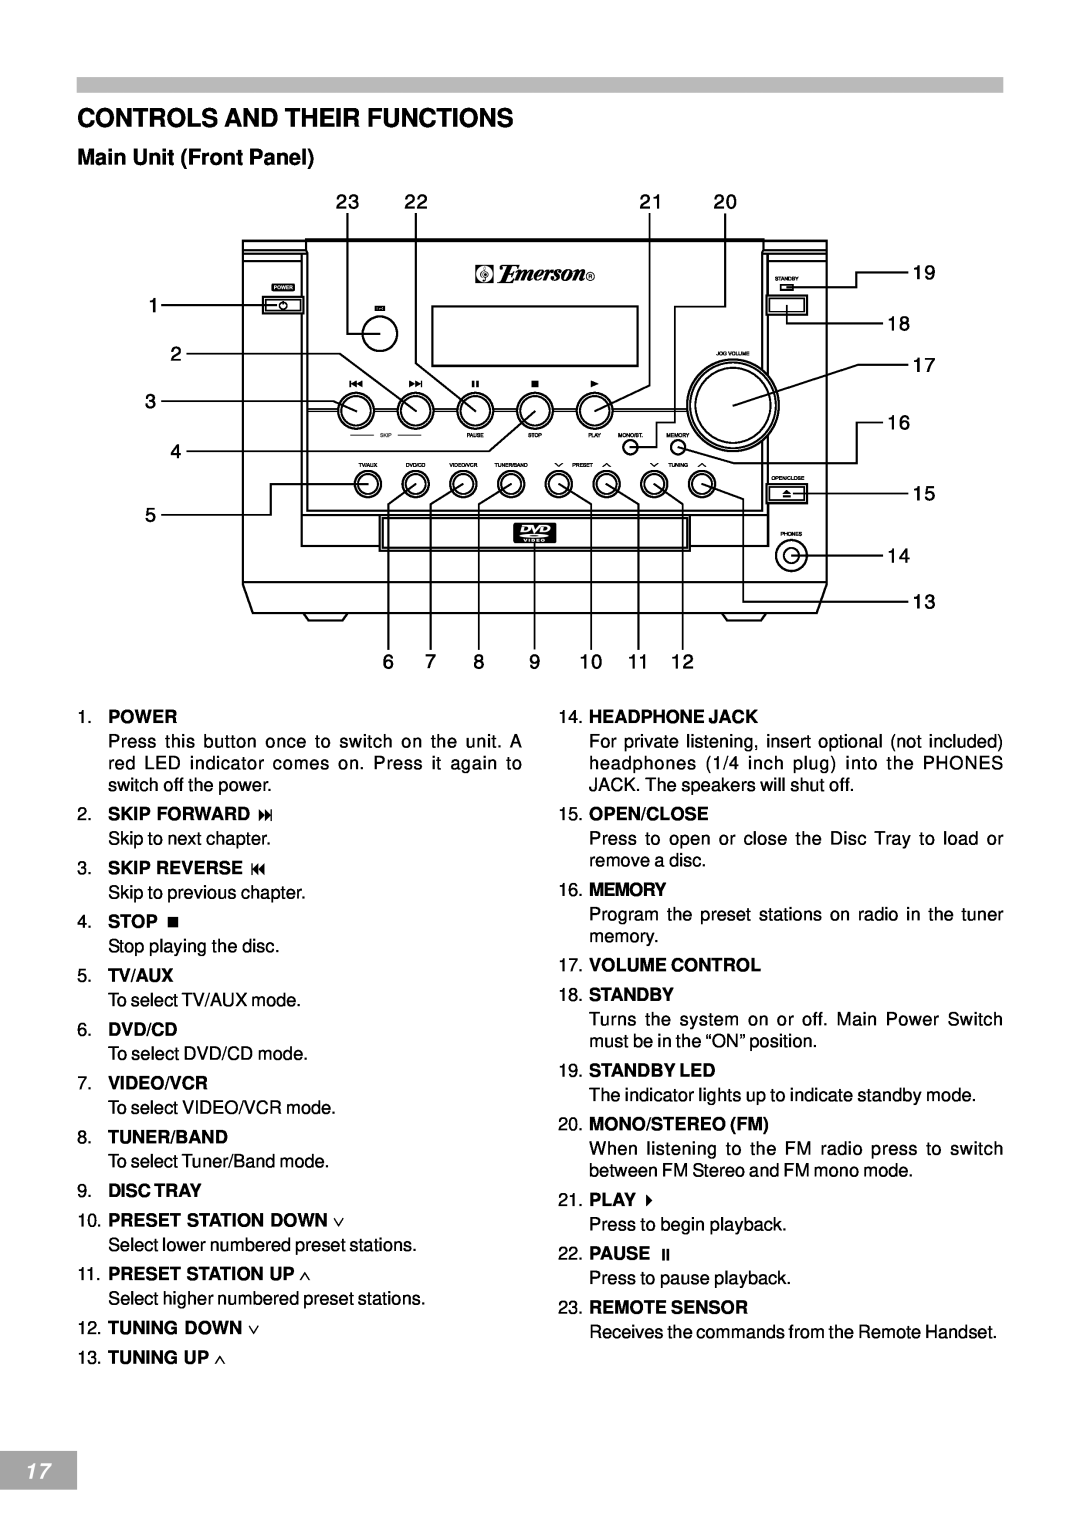 Emerson AV50 owner manual Controls And Their Functions, Main Unit Front Panel 